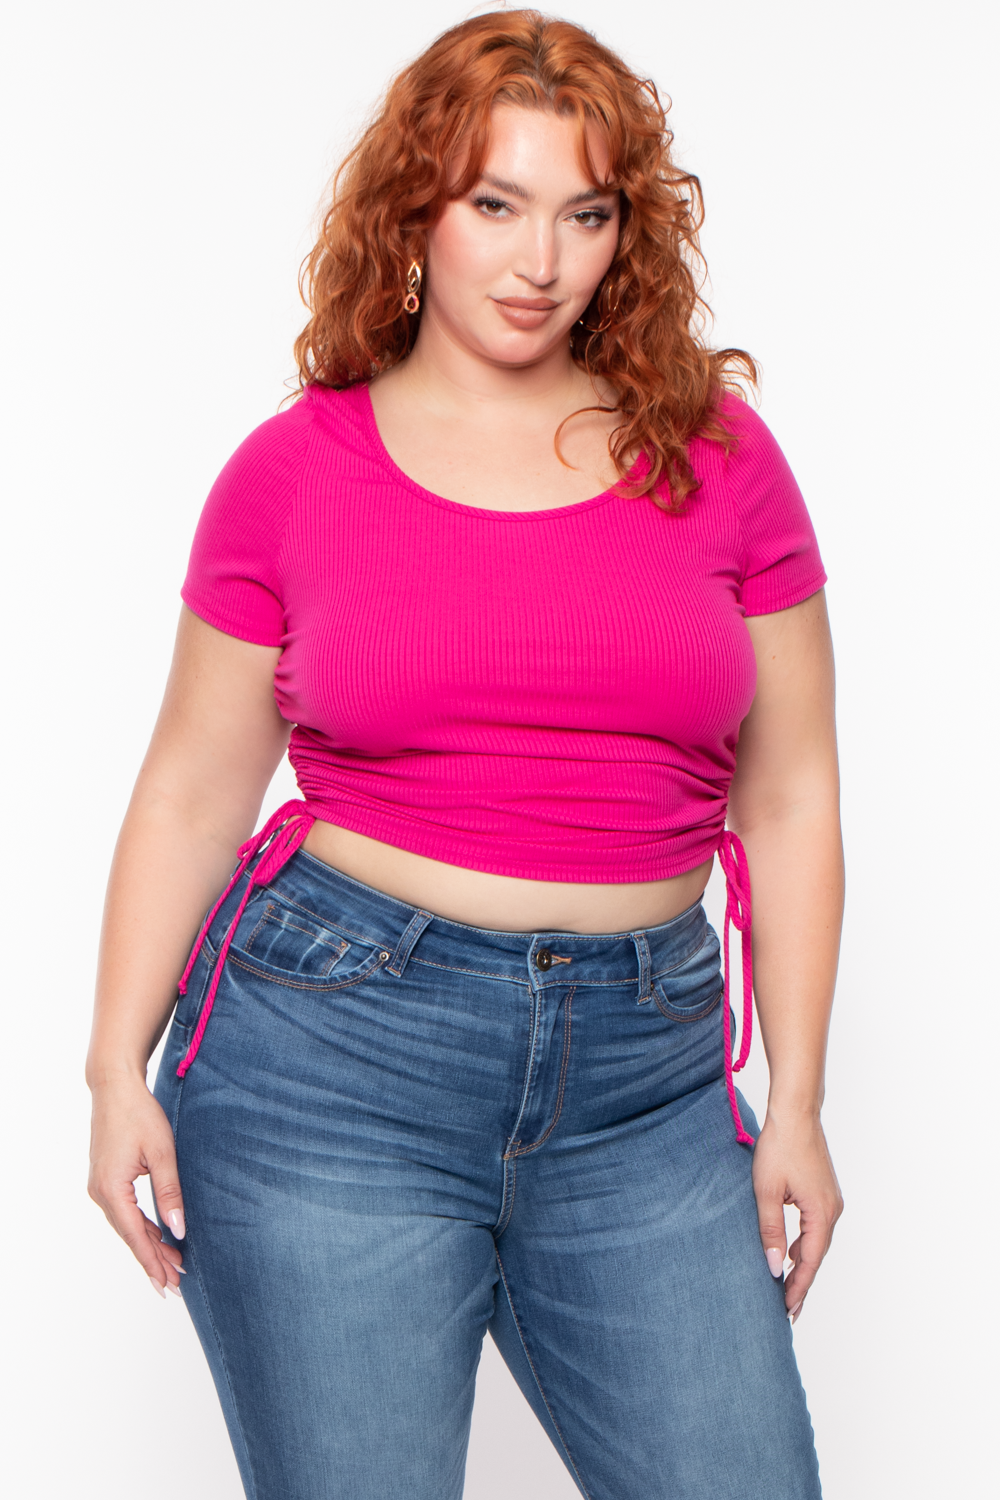 Tube Tops, Crop Tops For Plus Size Women And Styling